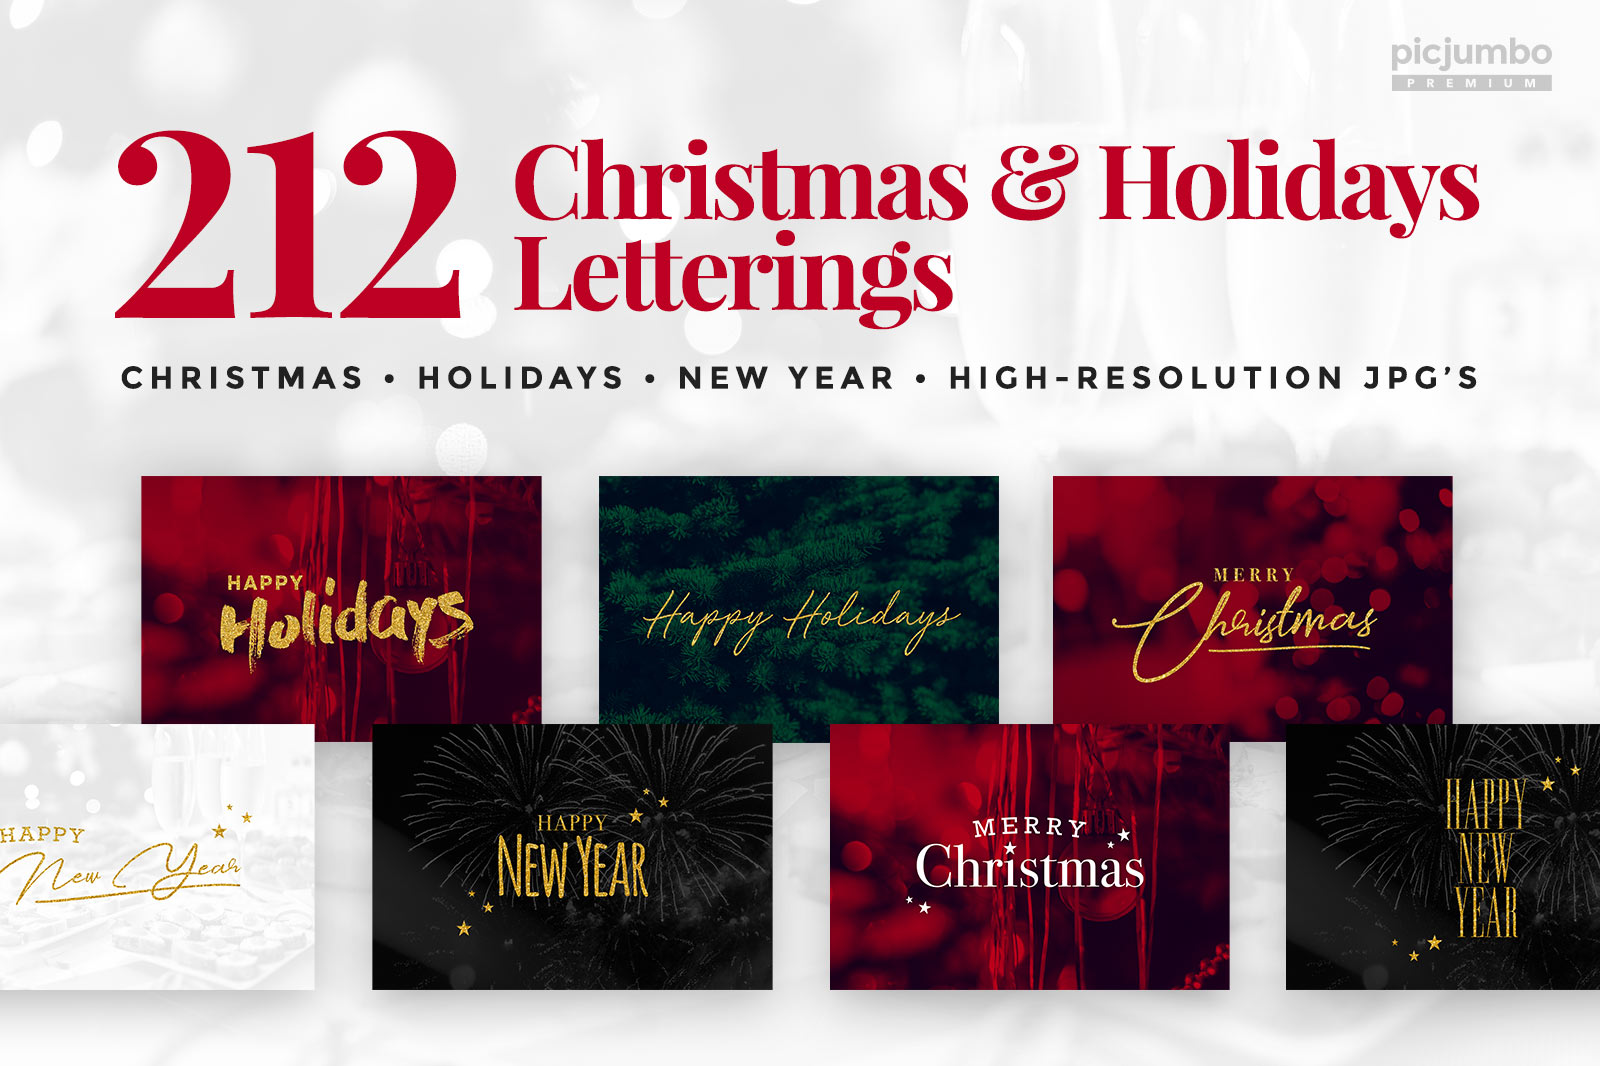 Download hi-res stock photos from our Holidays & Christmas Letterings PREMIUM Collection!